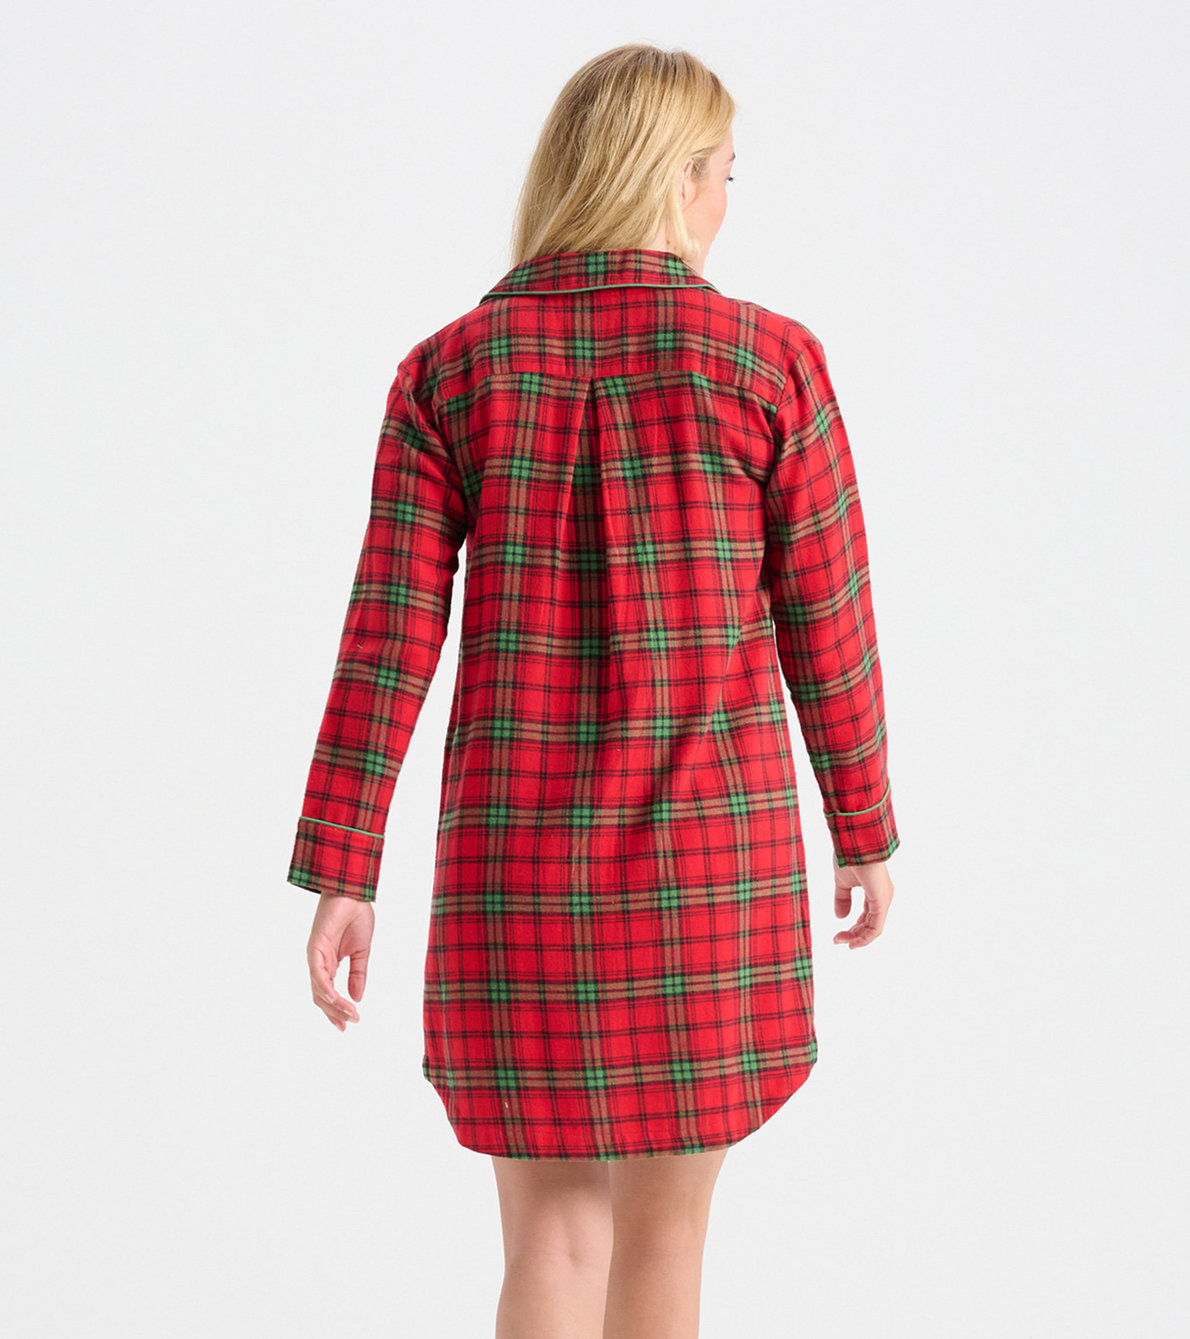 View larger image of Women's Classic Holiday Plaid Flannel Nightgown